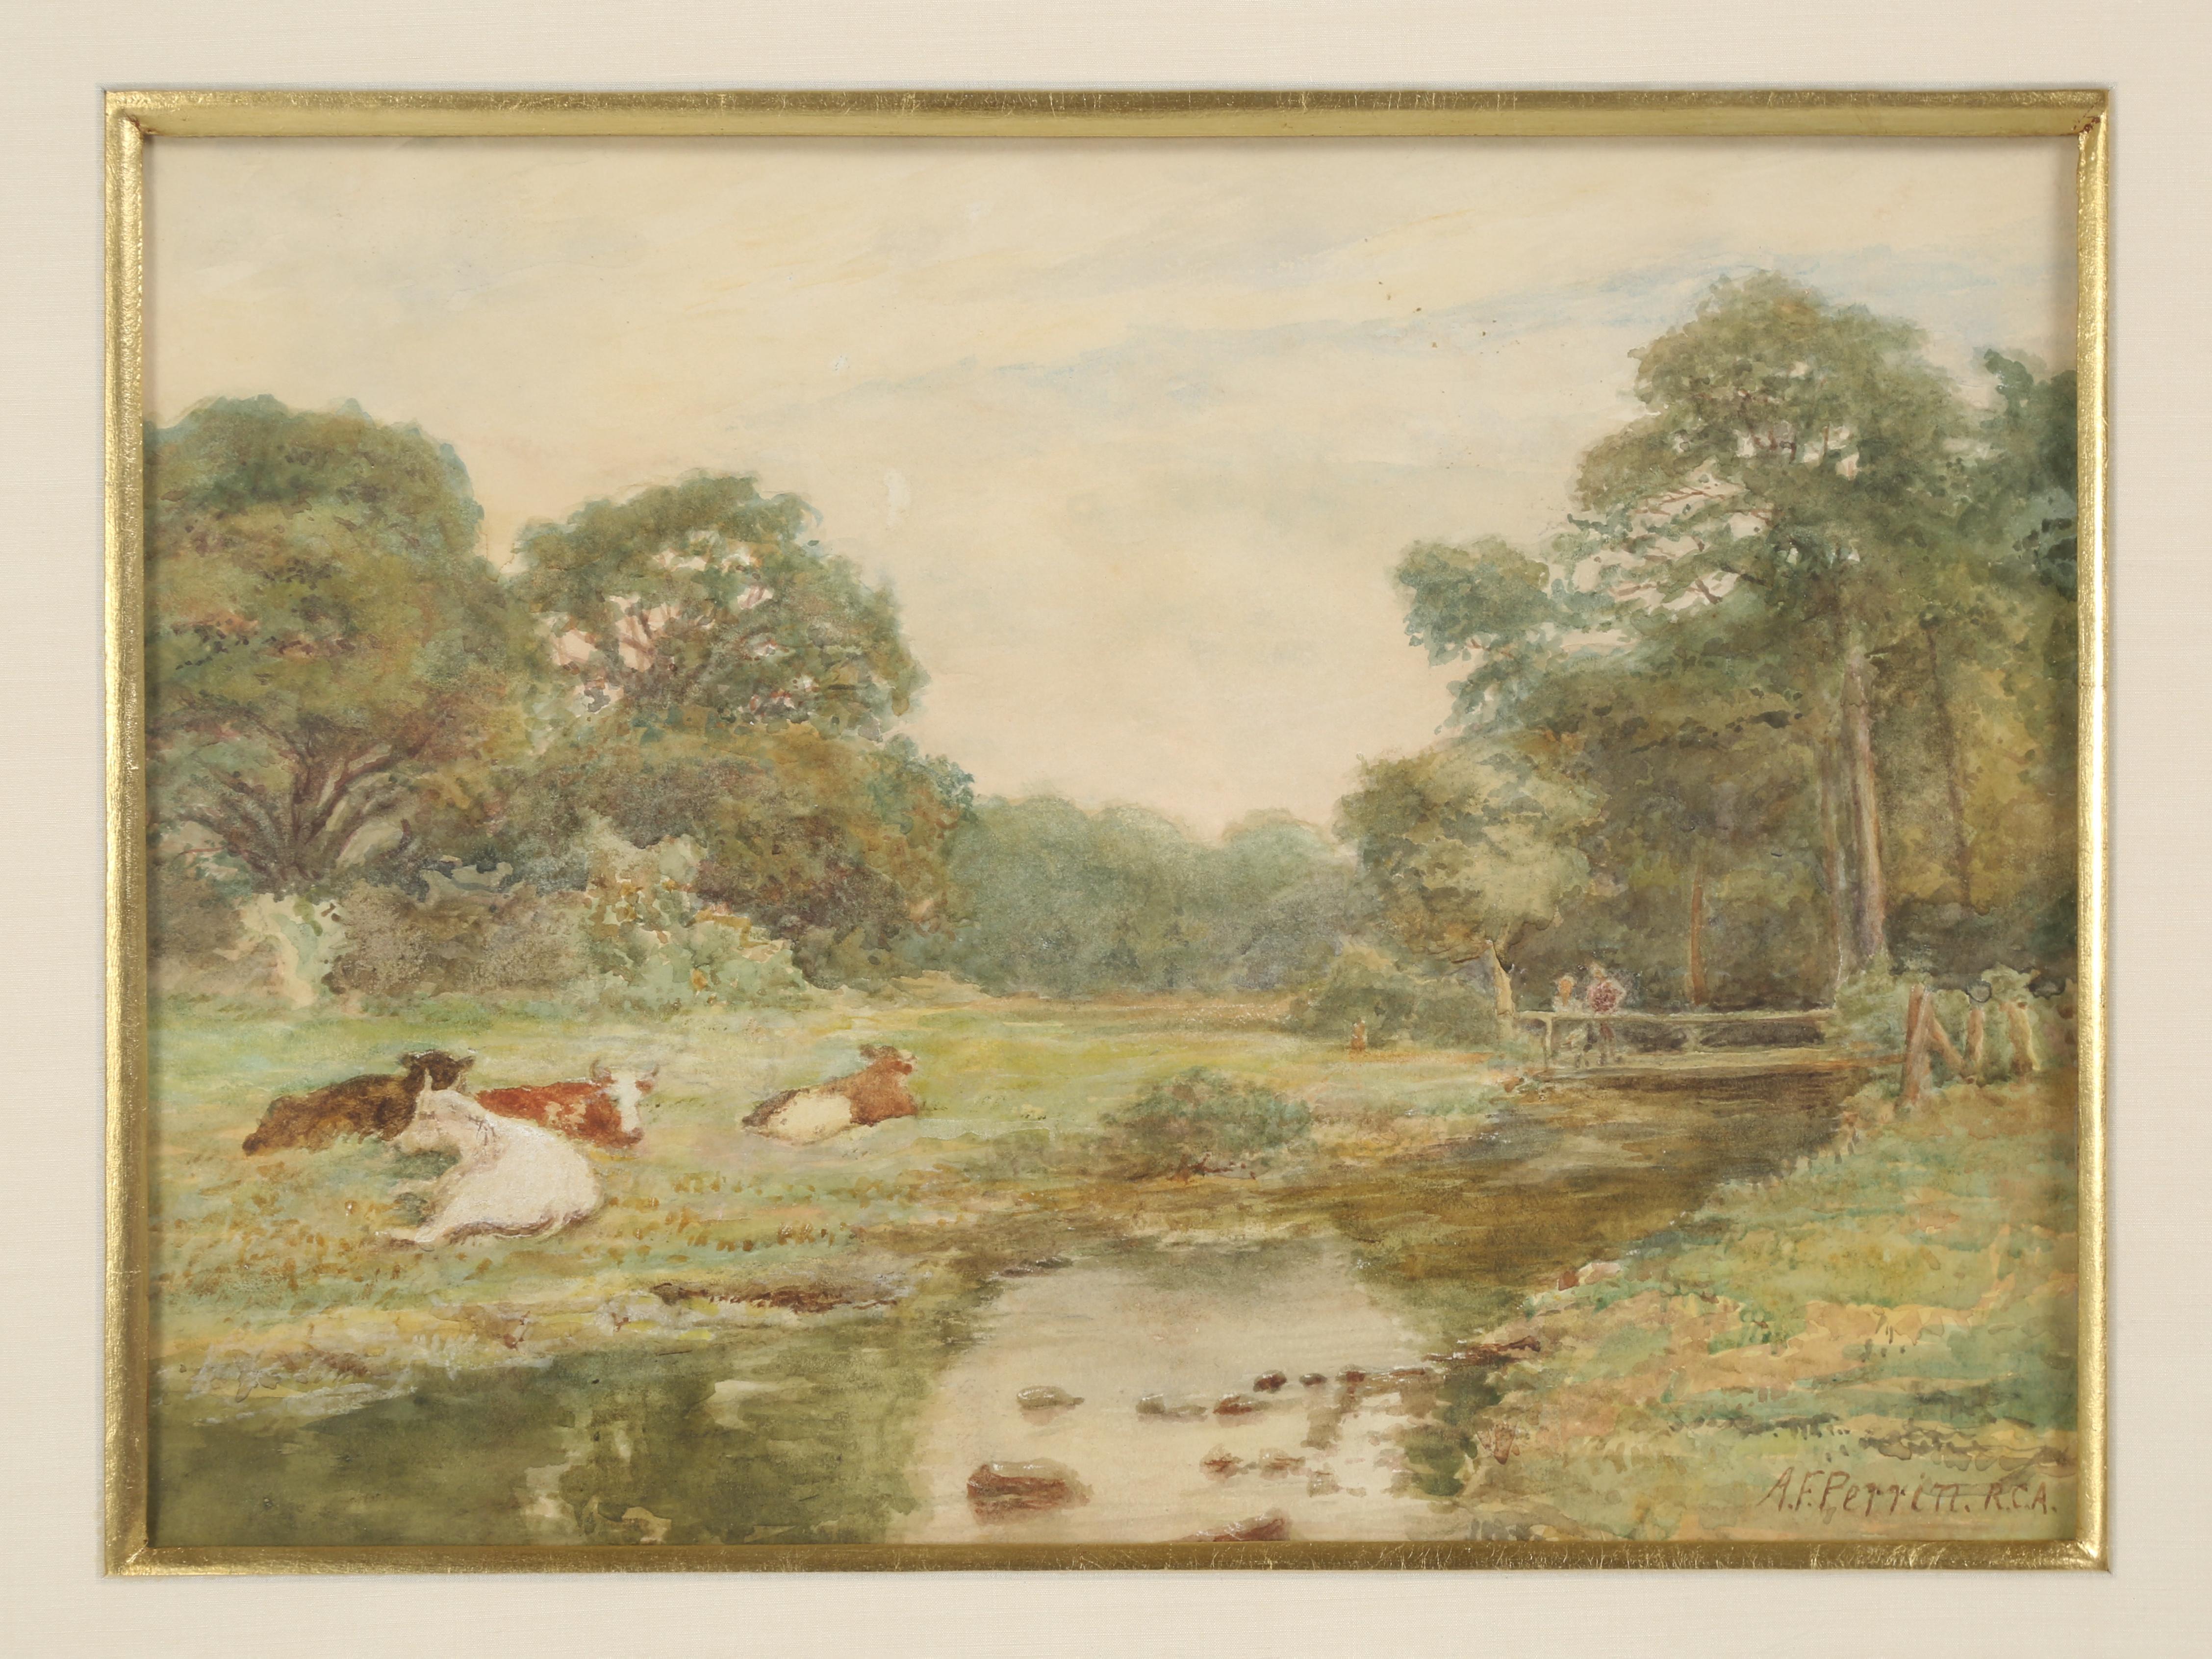 Alfred Feyen Perrin (1838 - 1918) was born in Birmingham, England and painted throughout the United Kingdom. Alfred Perrin is probably best known for his water color paintings and this particular Water Color Landscape painting is quite typical of